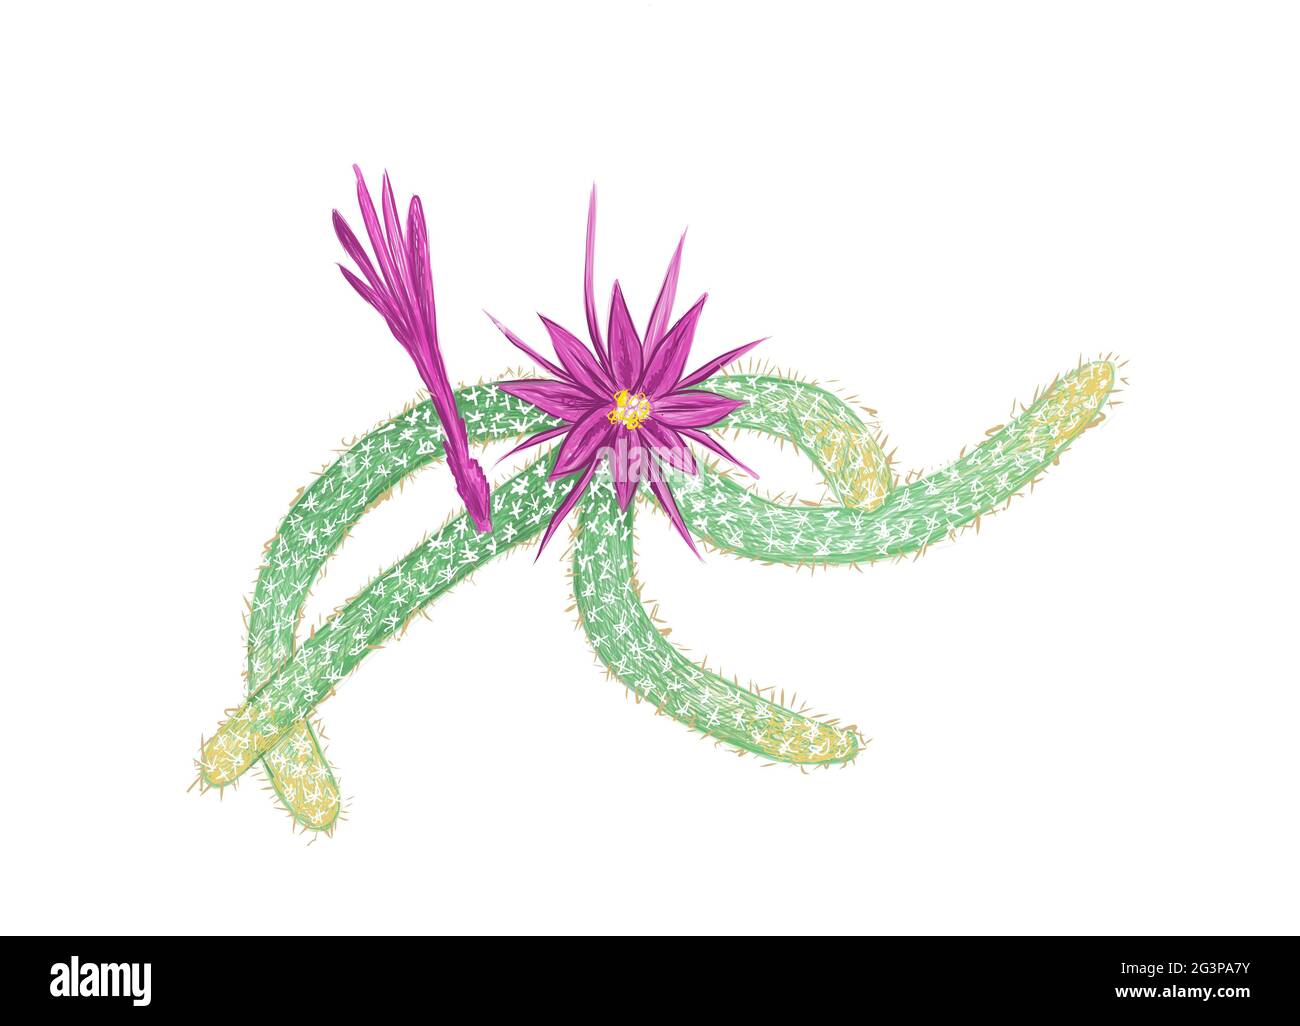 Illustration Hand Drawn Sketch of Disocactus Flagelliformis or Rat Tail Cactus. A Succulent Plants with Sharp Thorns for Garden Decoration. Stock Photo